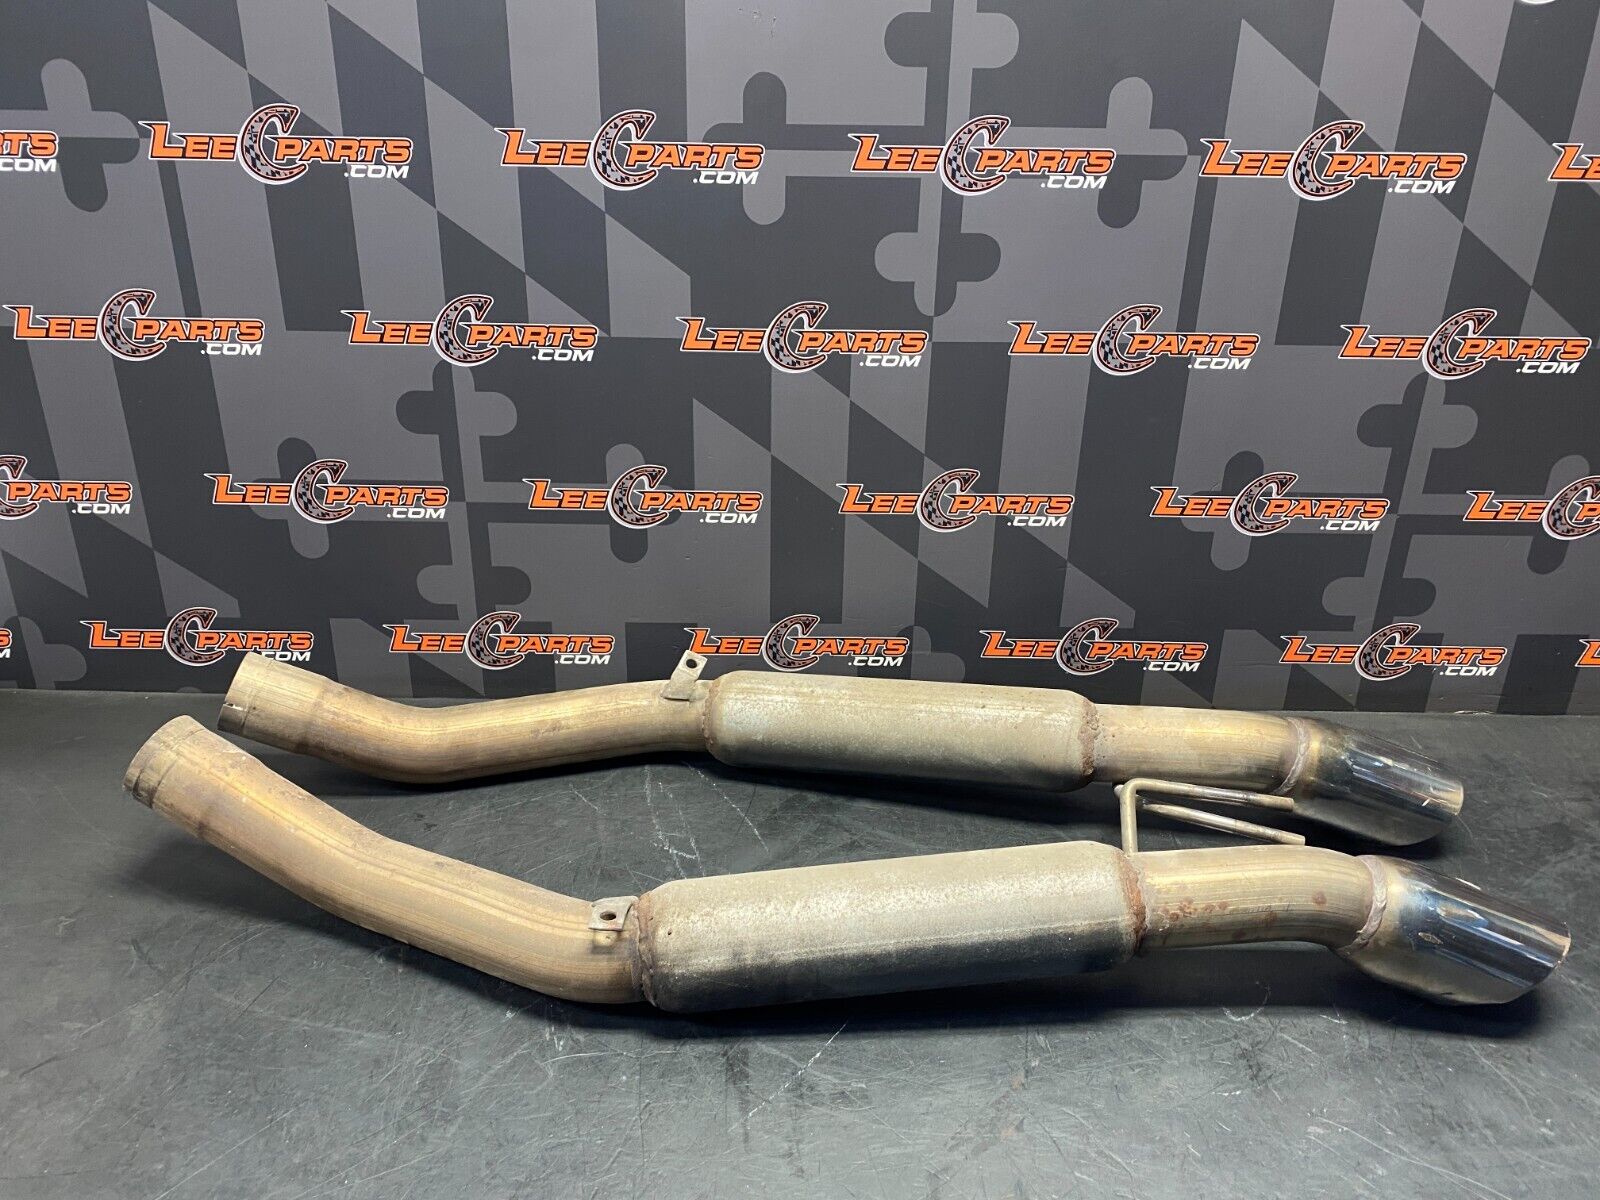 1996 DODGE VIPER RT/10 REAR EXIT AXLE BACK EXHAUST MUFFLERS USED